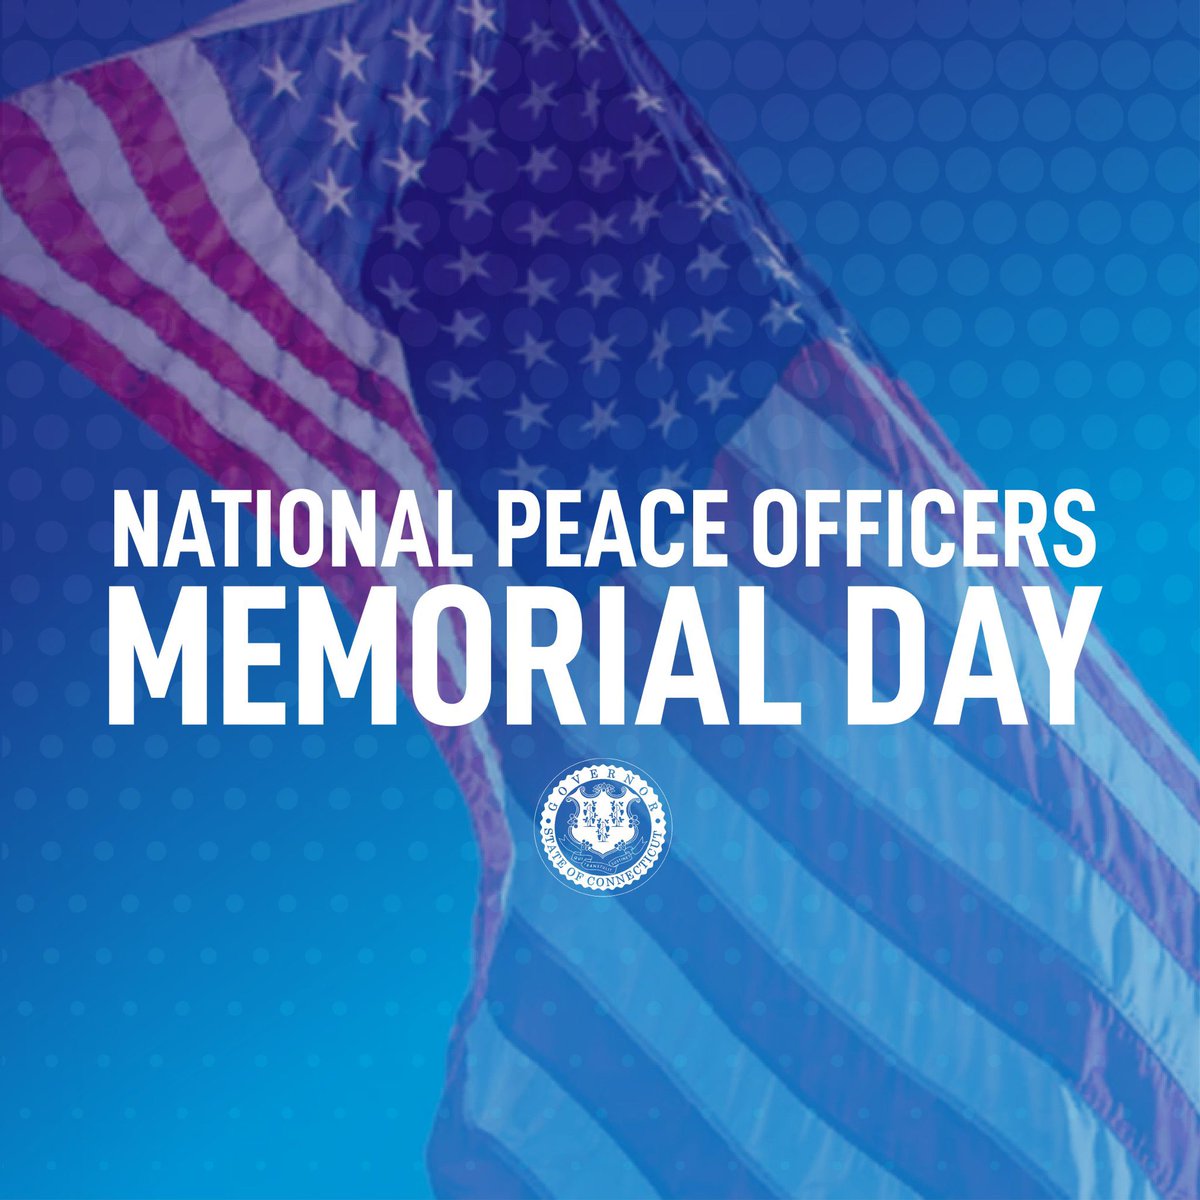 Today, on Peace Officers Memorial Day, we honor and remember all law enforcement heroes who were killed in the line of duty protecting our communities. I urge everybody to thank our law enforcement and keep those who have given their lives, and their families, in your prayers.